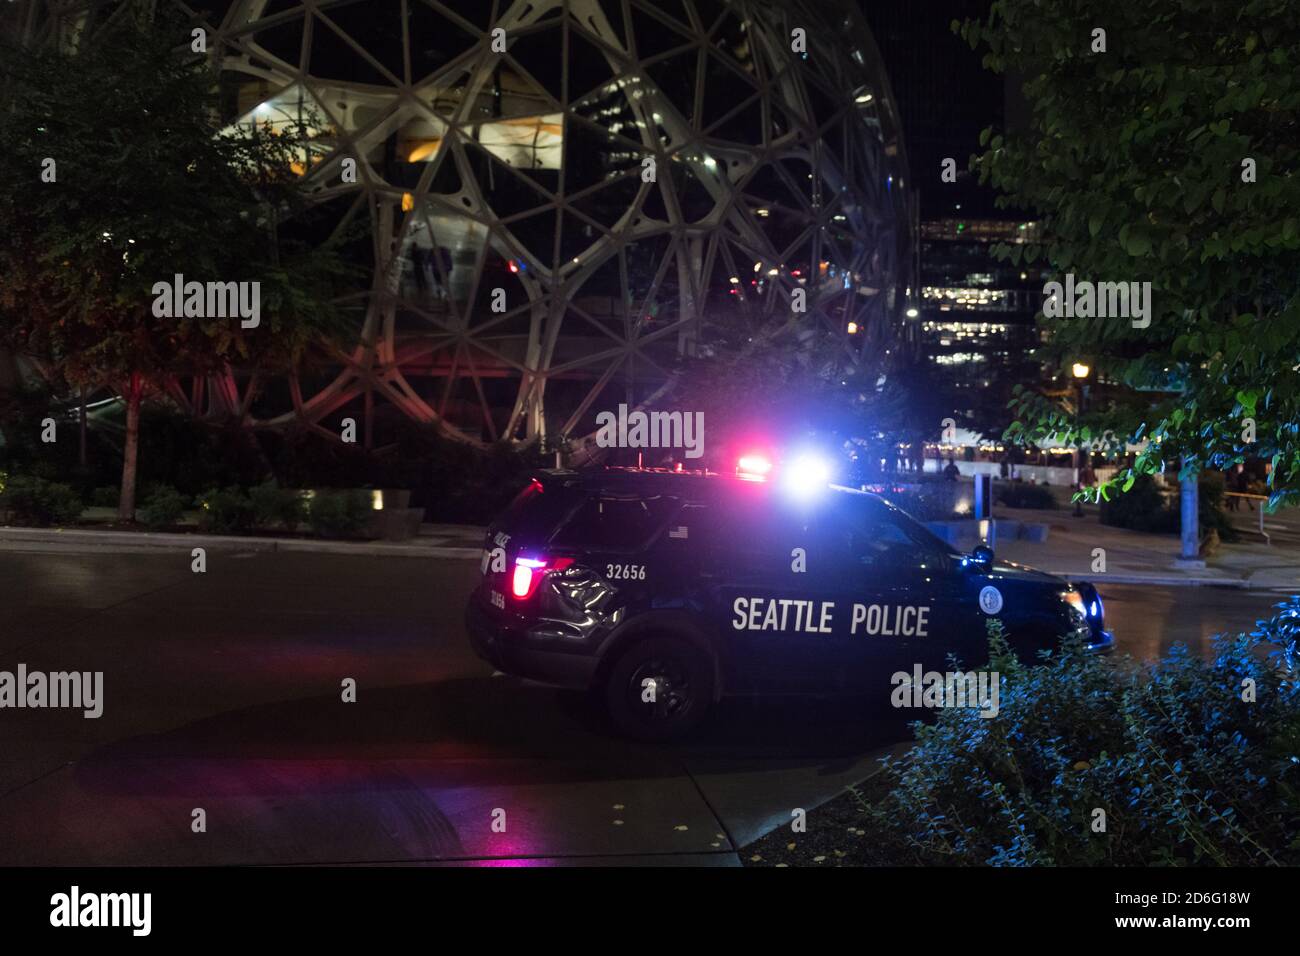 Seattle Police Car High Resolution Stock Photography and Images - Alamy